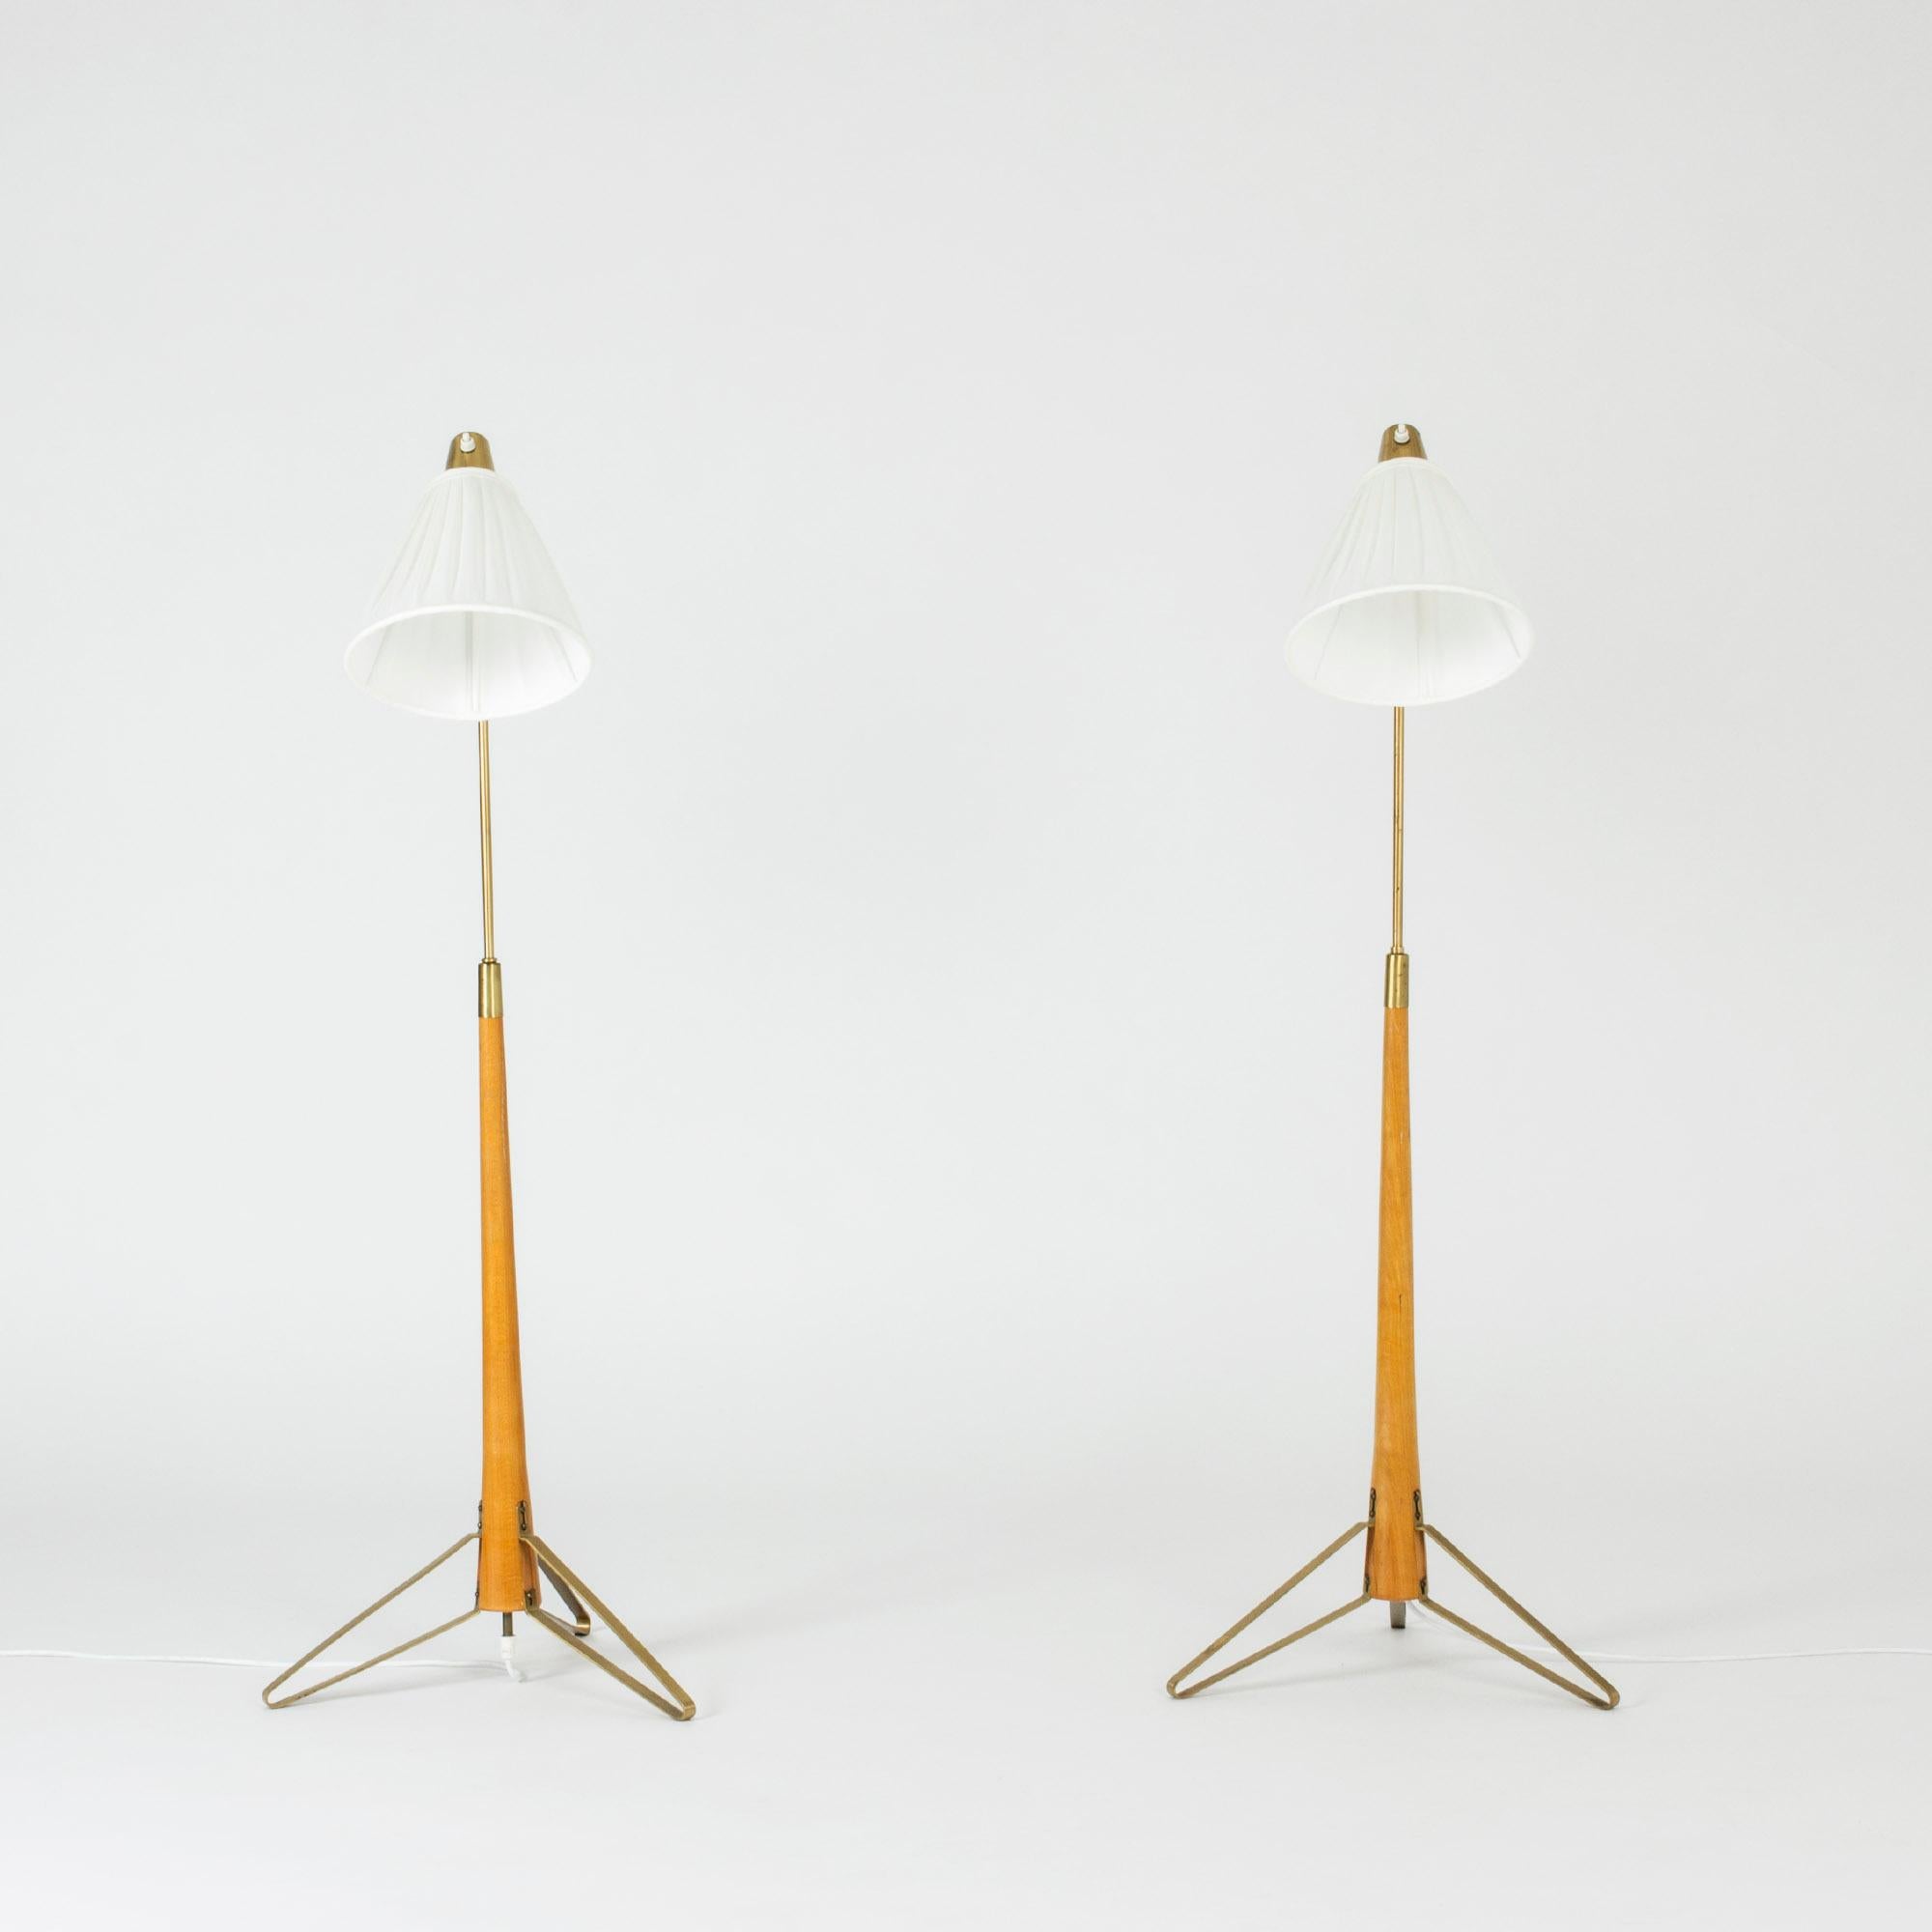 Pair of brass floor lamps by Hans Bergström, with beech handles and elaborately folded brass feet. 

The lamps have the same lowest height, 116 cm, but can be adjusted to different heights, 137.5 and 146.5 cm.